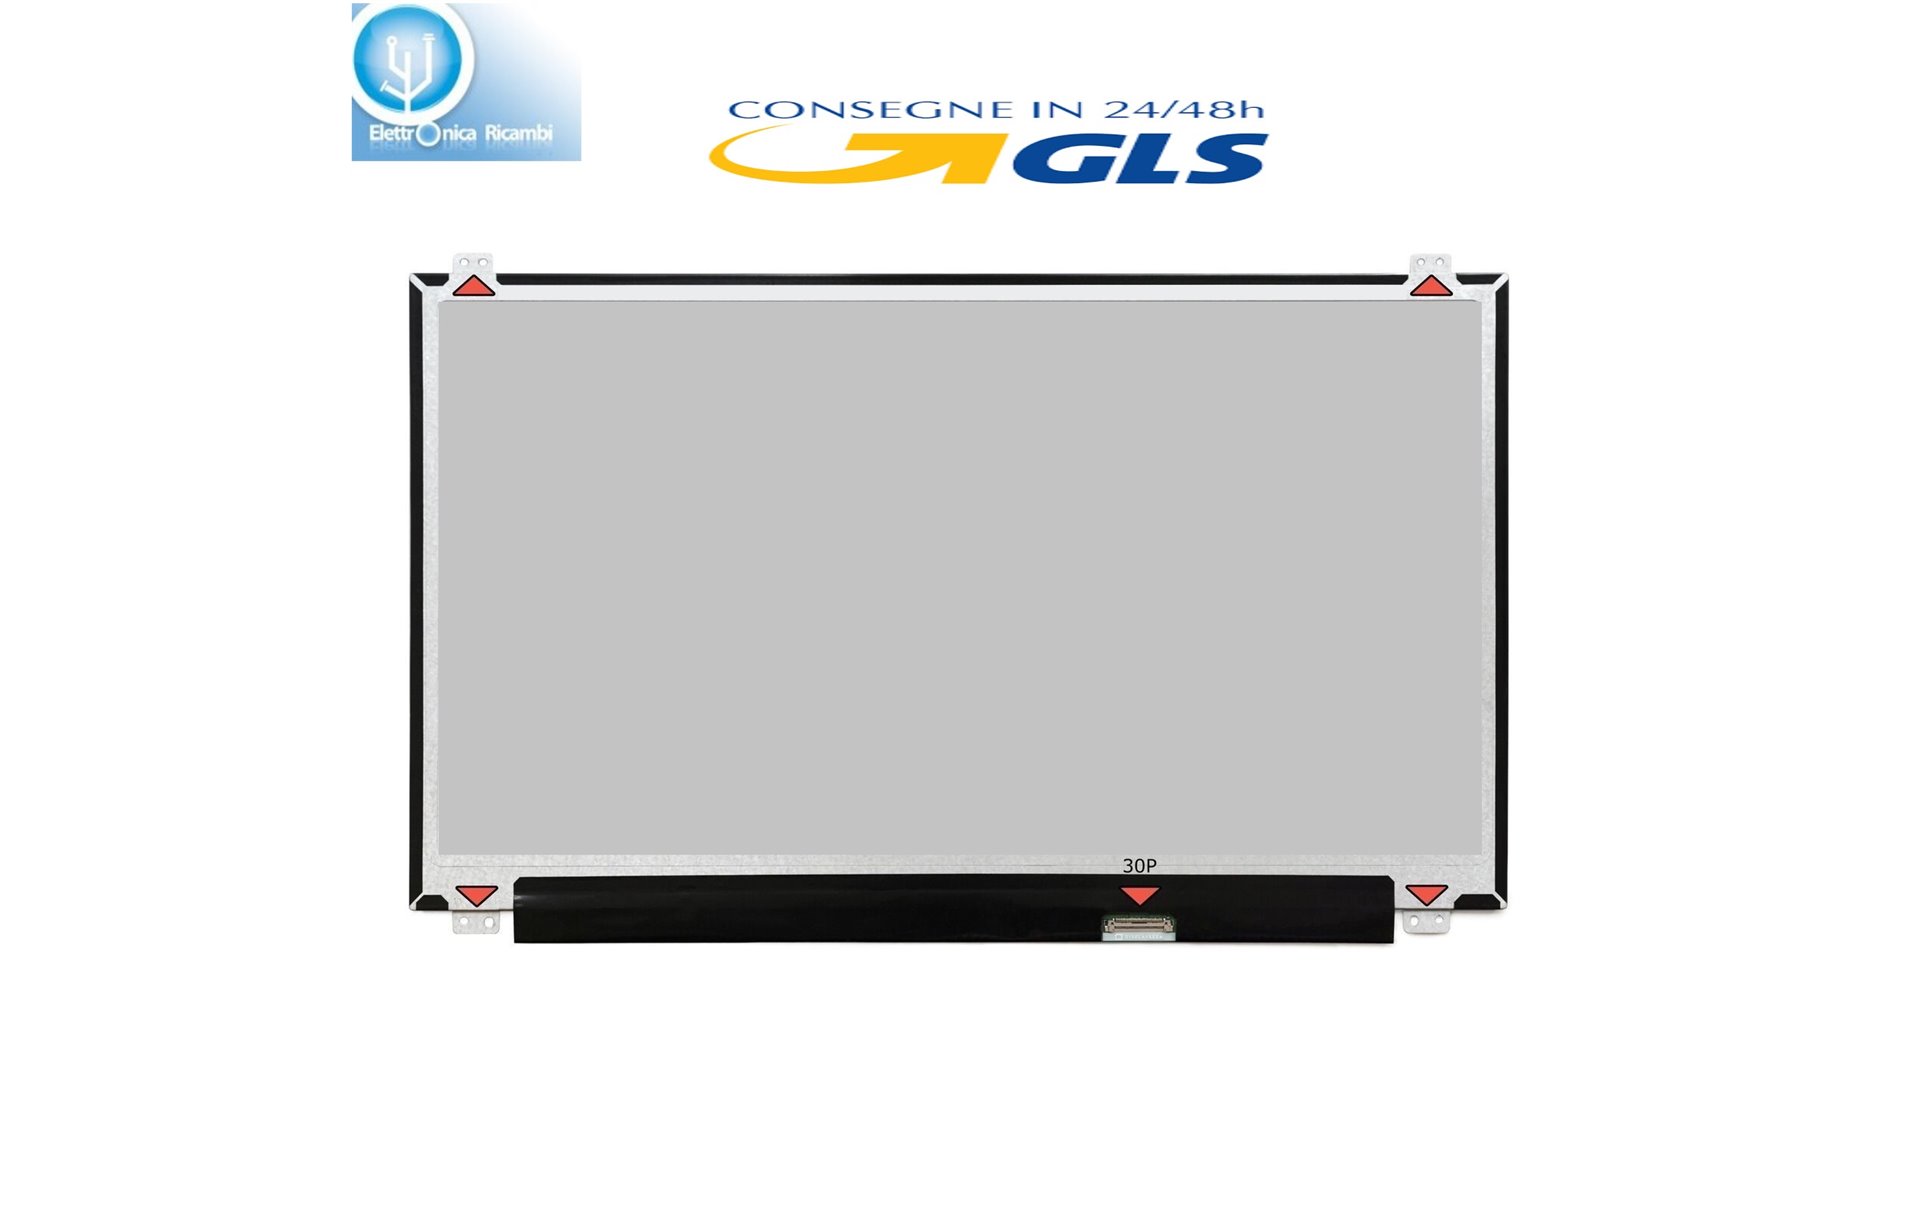 Display LCD Schermo 15,6 LED Acer Aspire A515-41G-16CZ